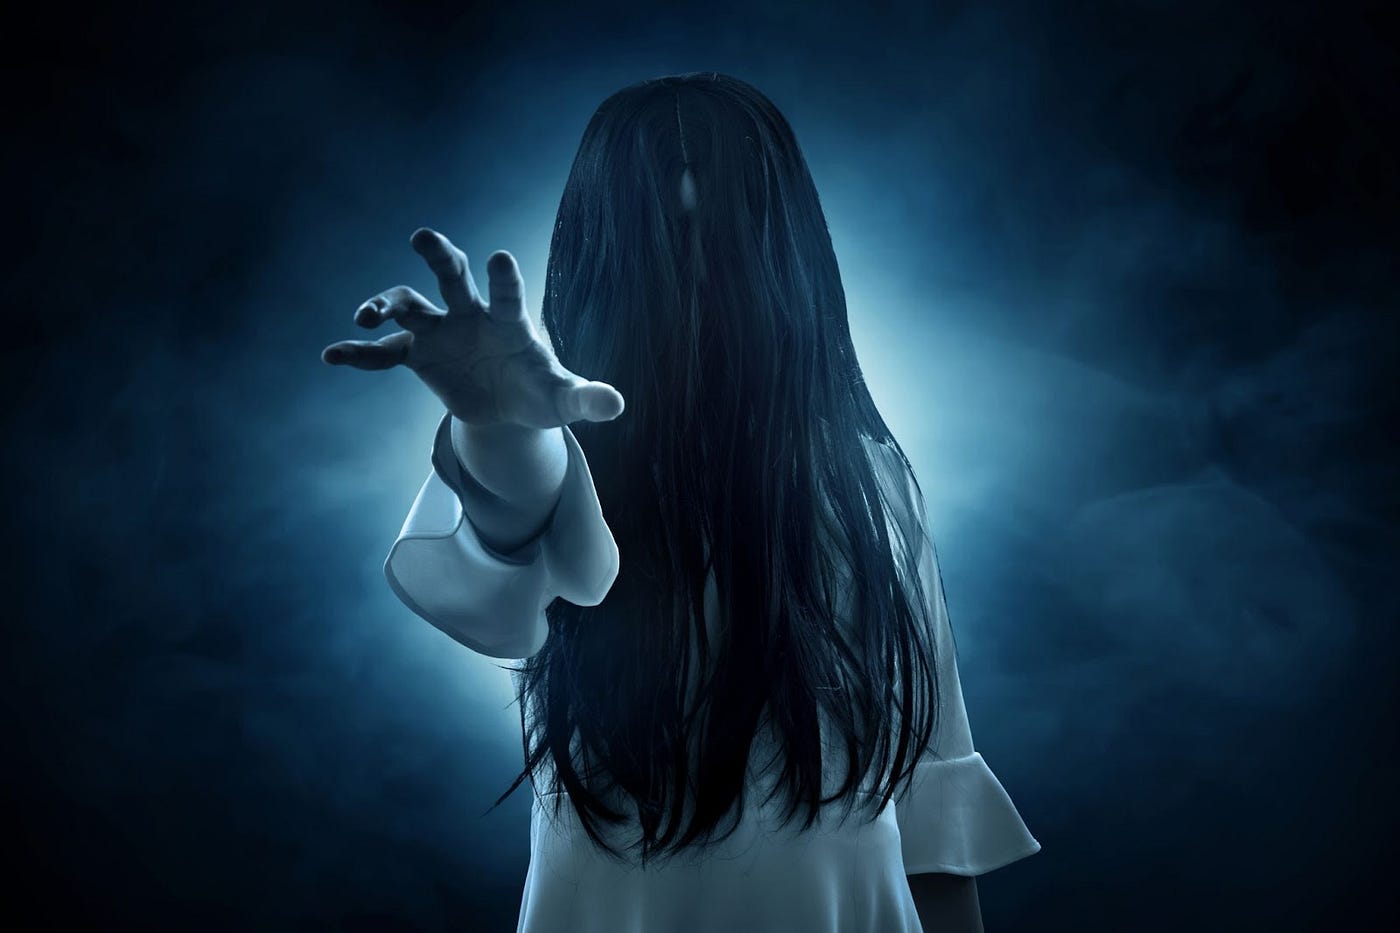 Girl Talk: Why are Ghosts Always Female?